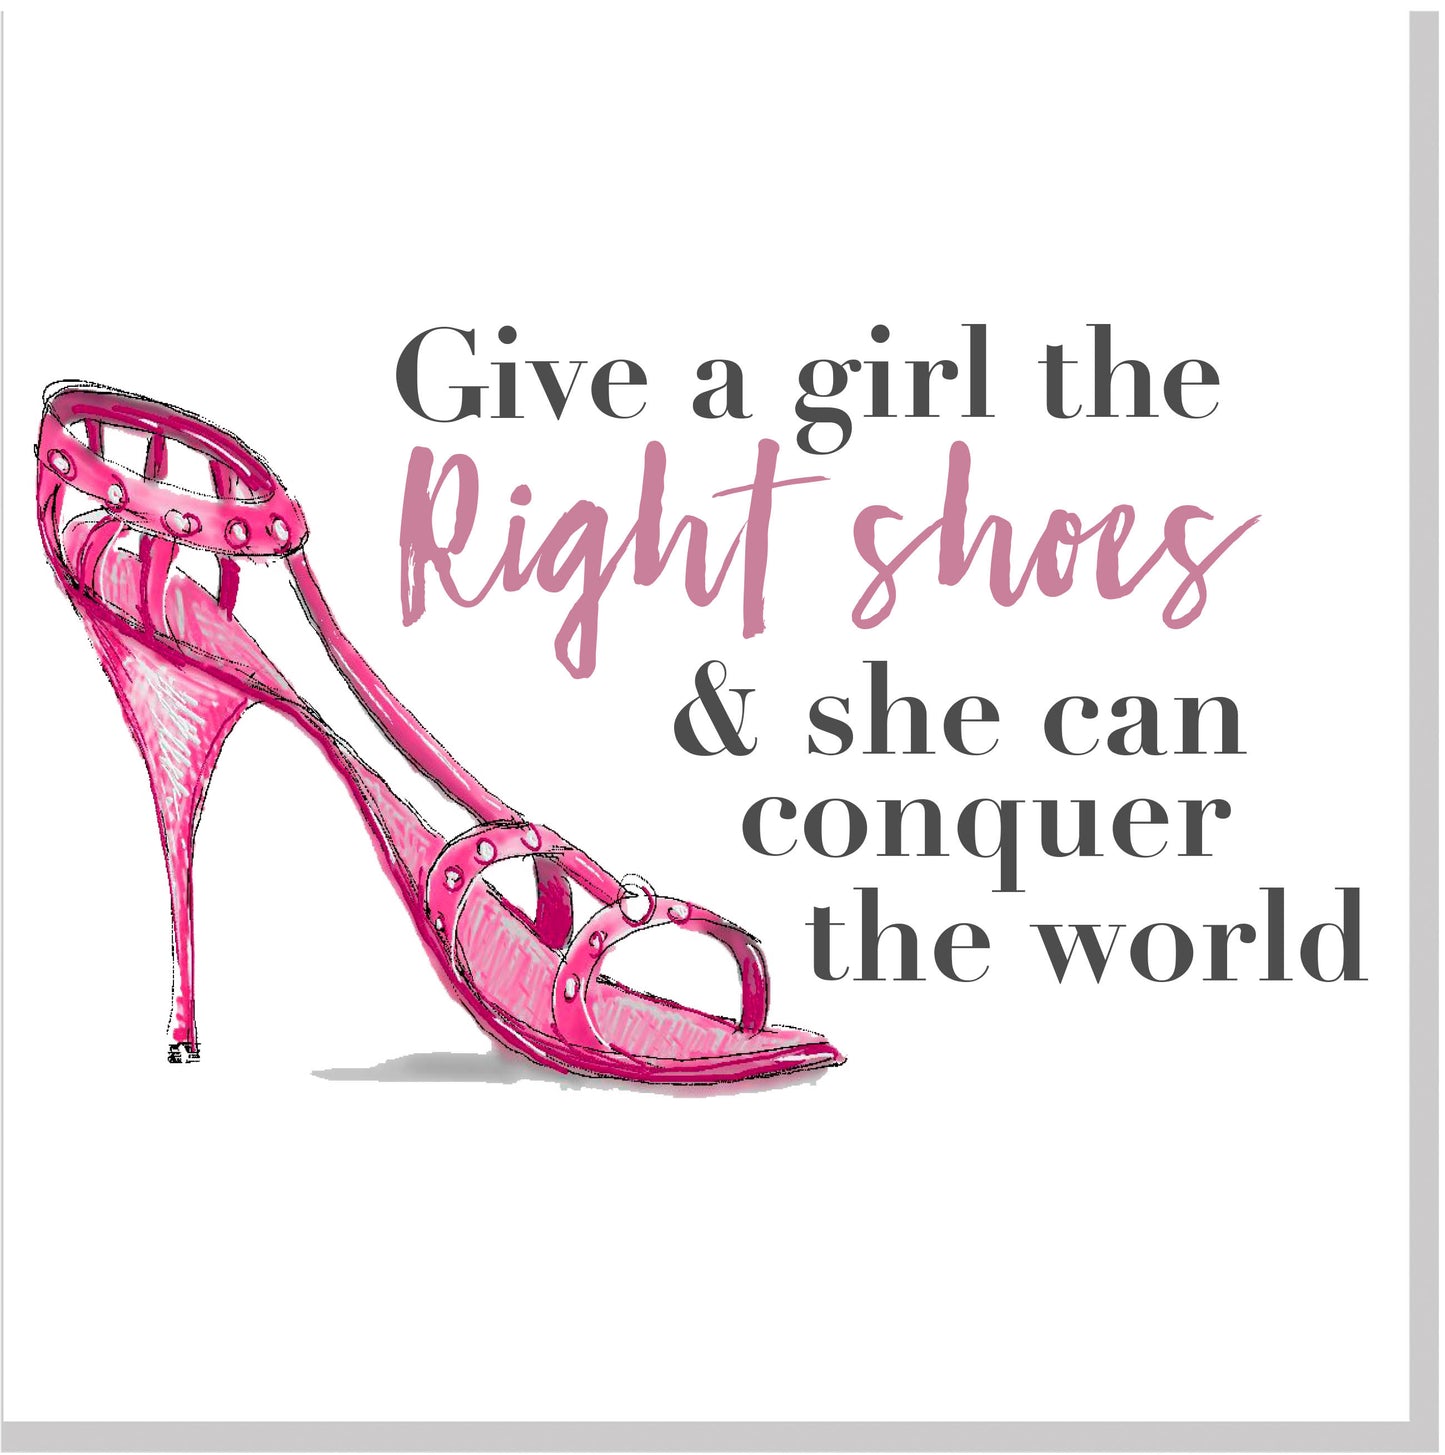 Right shoes square card pink